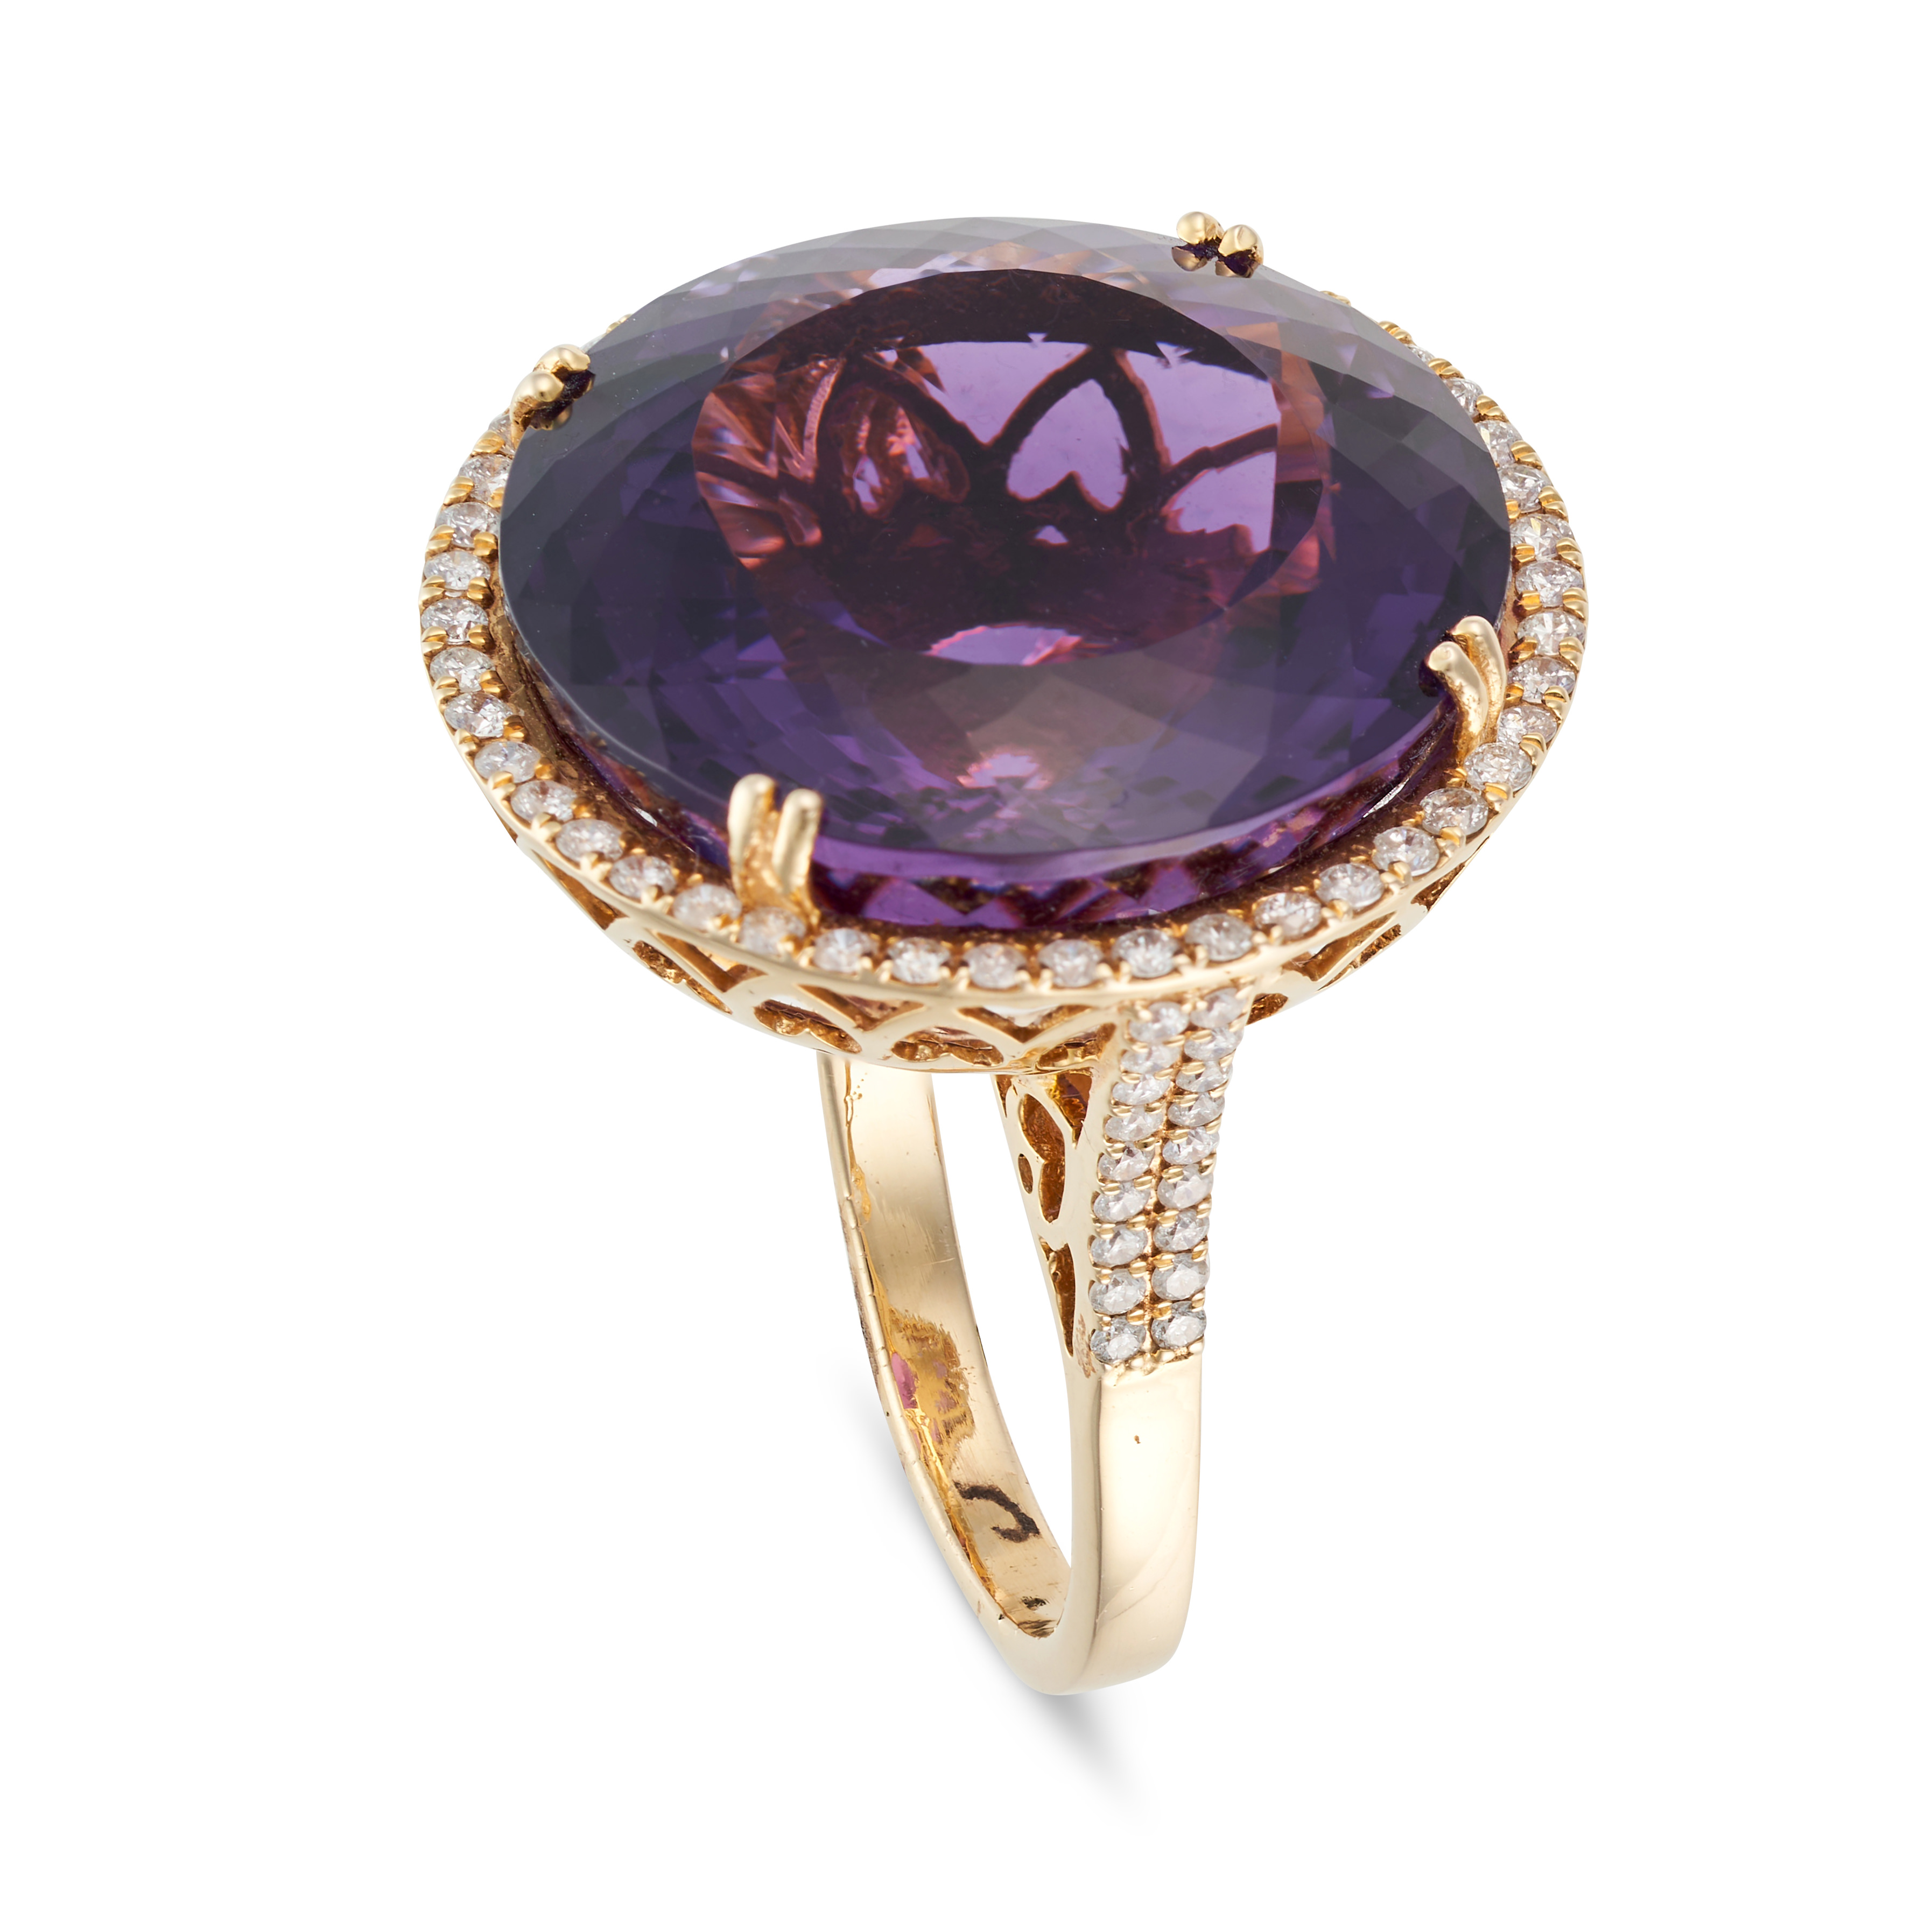 AN AMETHYST AND DIAMOND DRESS RING set with a round cut amethyst of 31.34 carats in a border of r... - Image 2 of 2